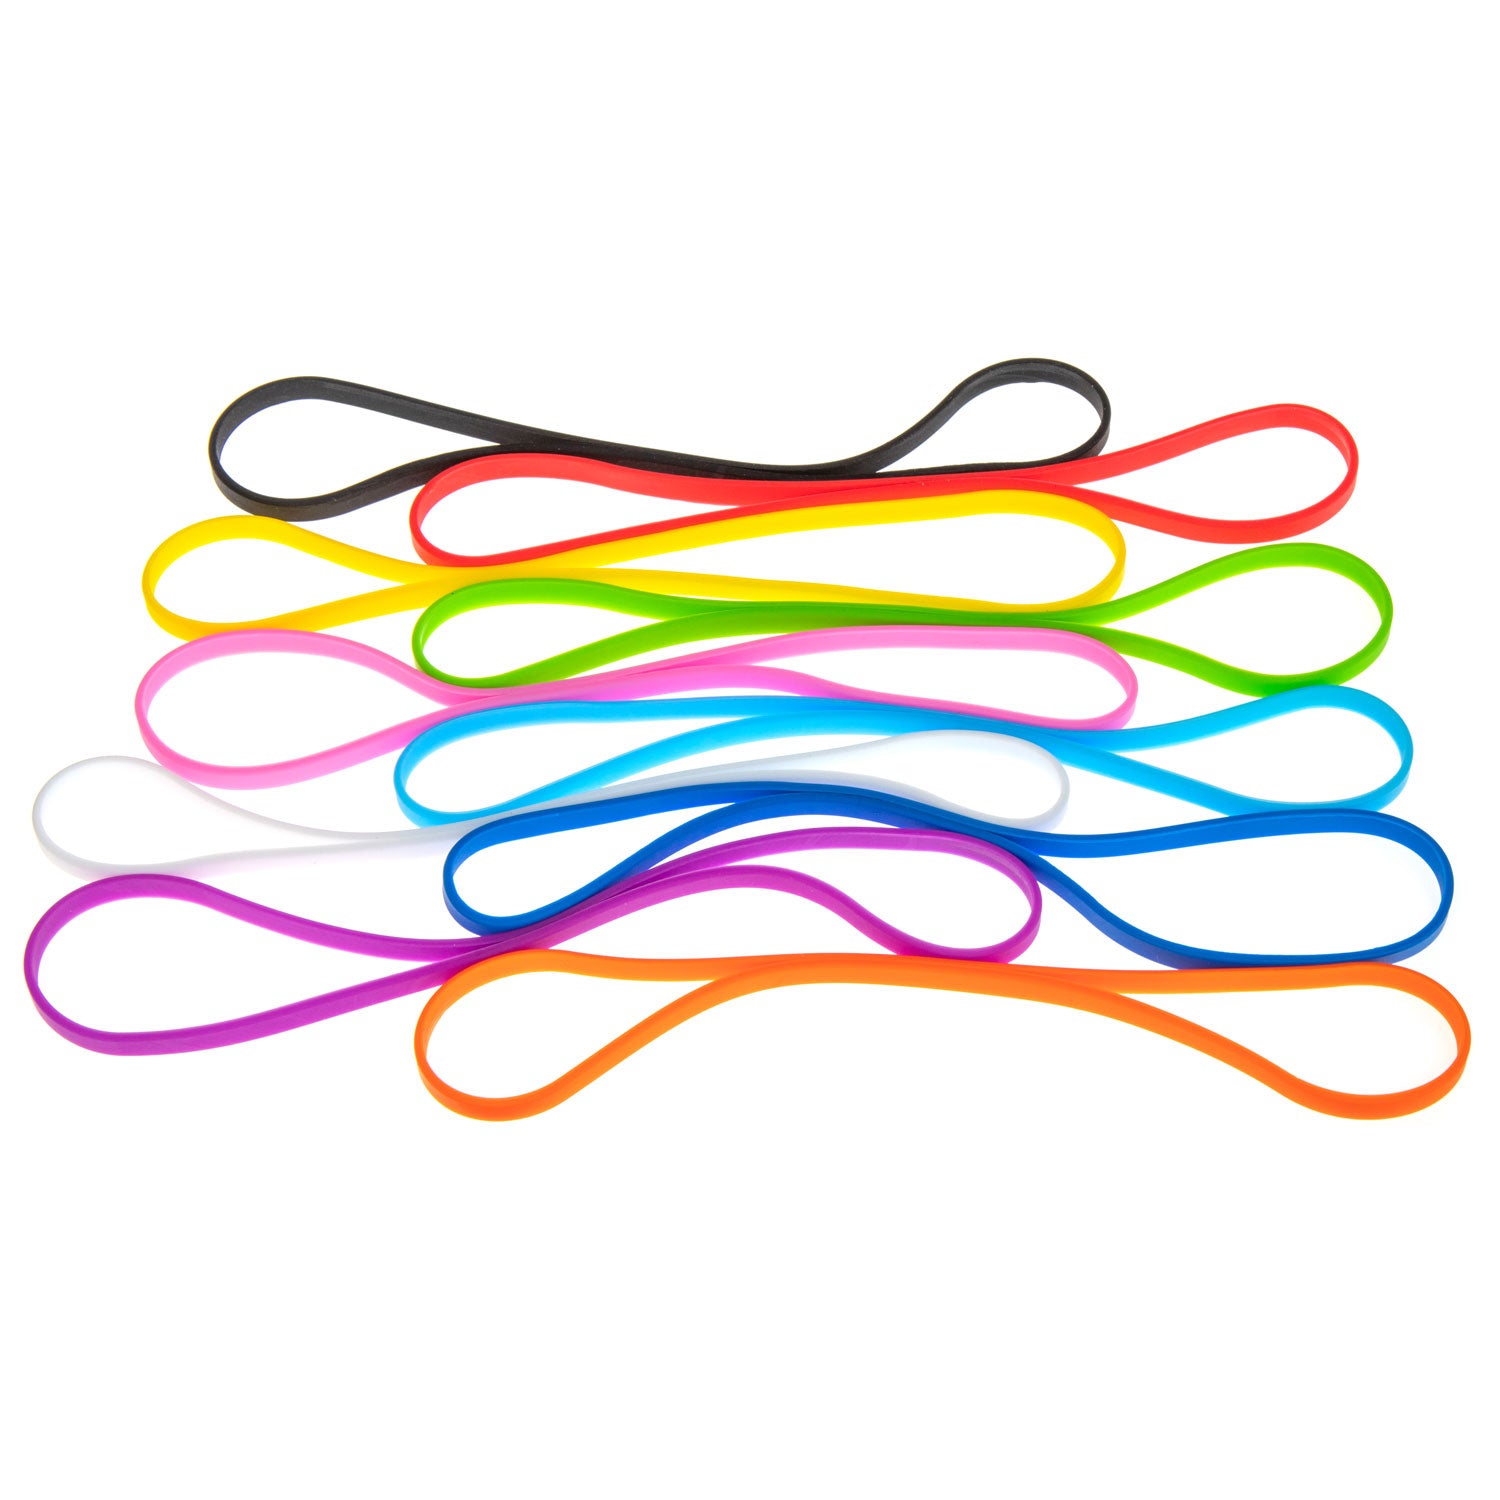 Grifiti Band Joes 9 x 0.25 5.73 inch Diameter 10 Pack Assorted Colorful Small Silicone Little Colored Rubber Bands Wrist Cooking Office Boxes